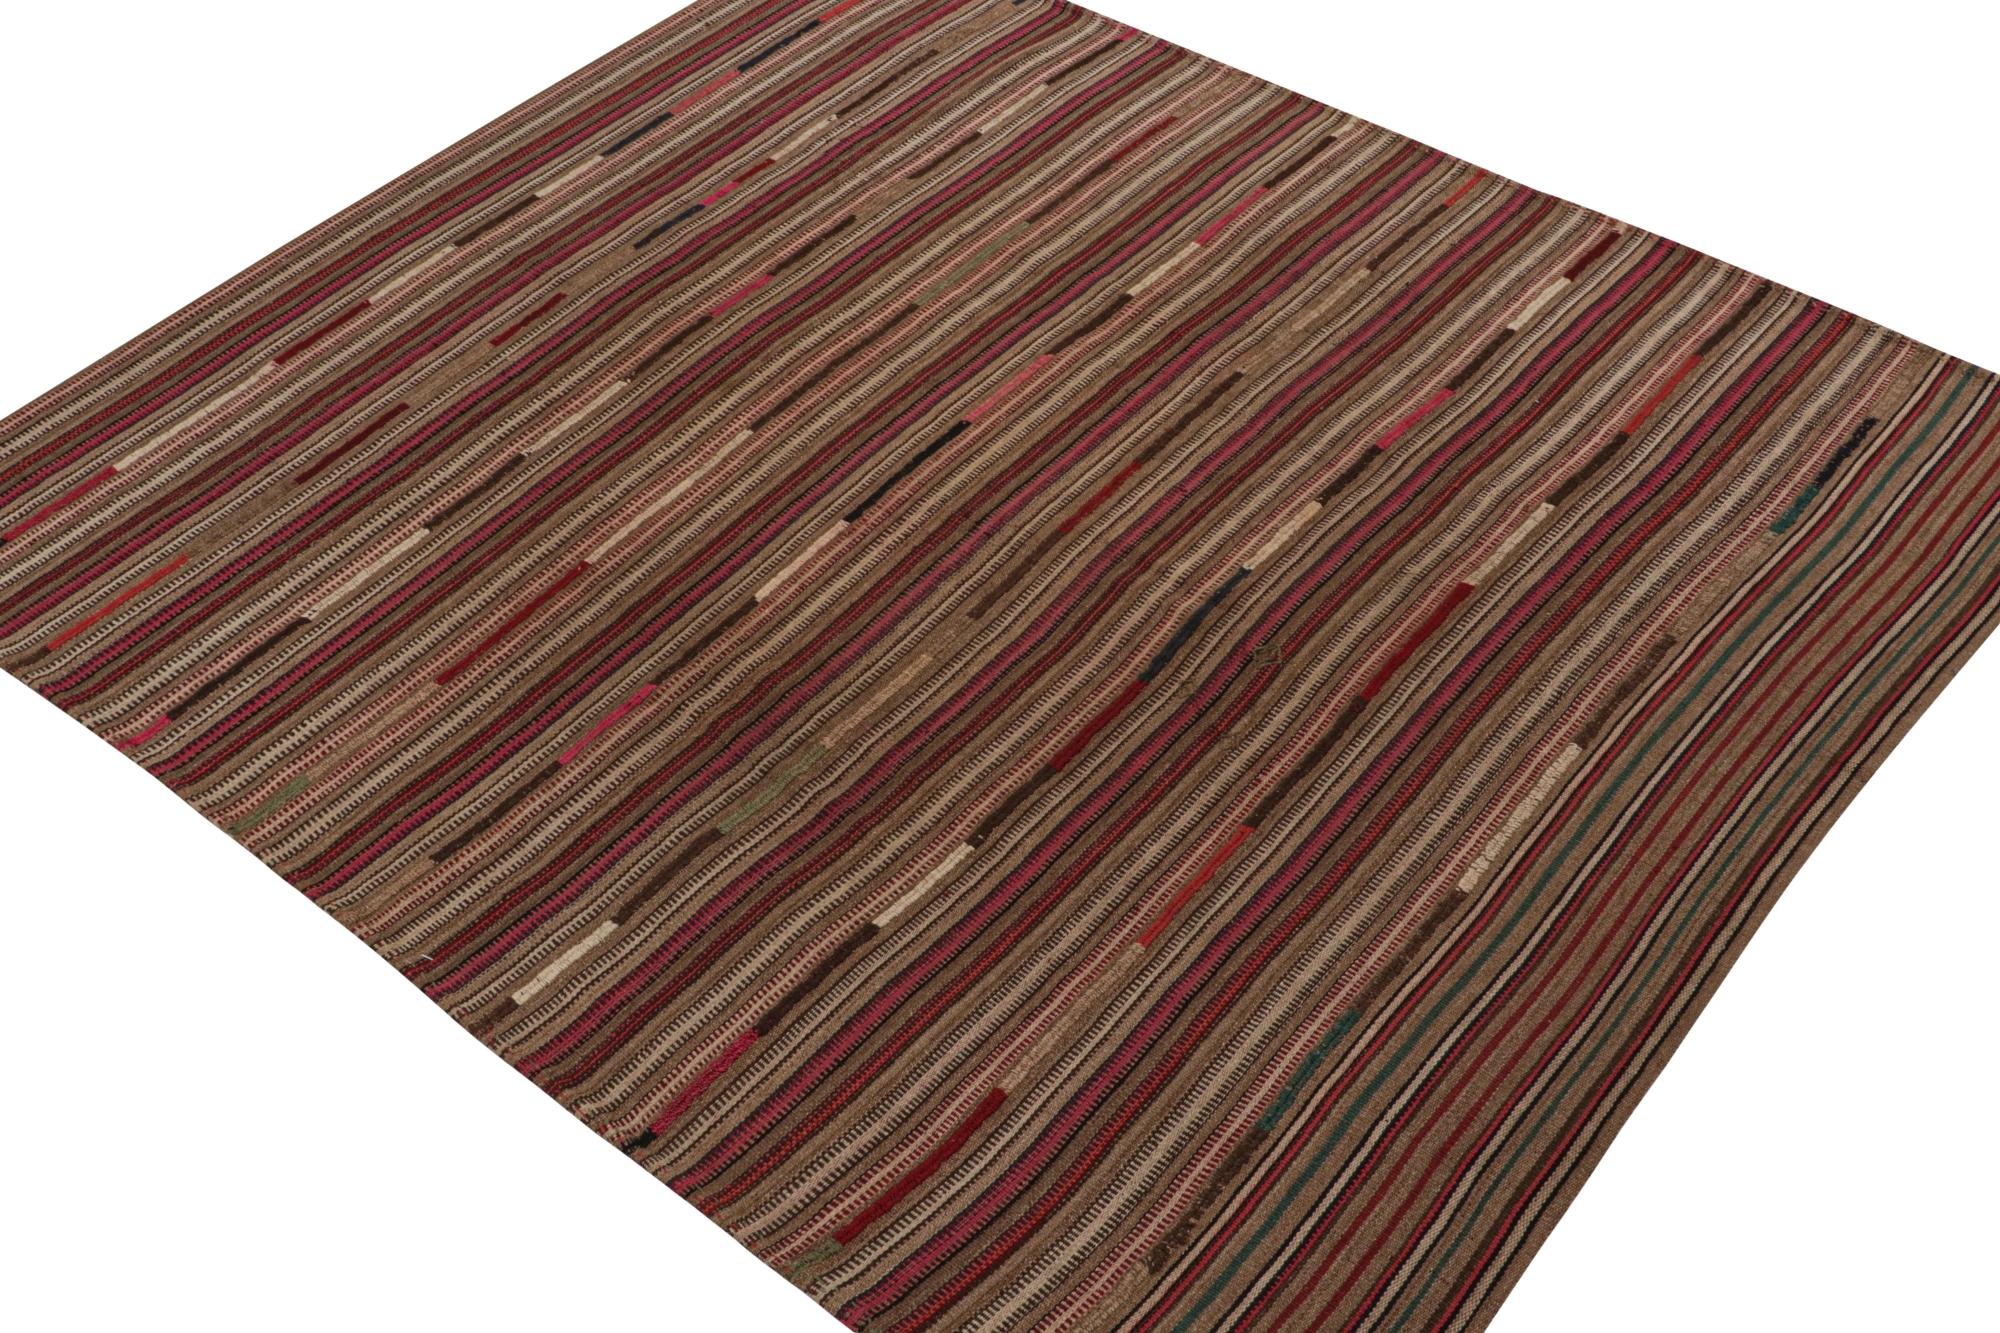 Vintage Persian Kilim in Pink and Beige-Brown Stripes by Rug & Kilim In Good Condition For Sale In Long Island City, NY